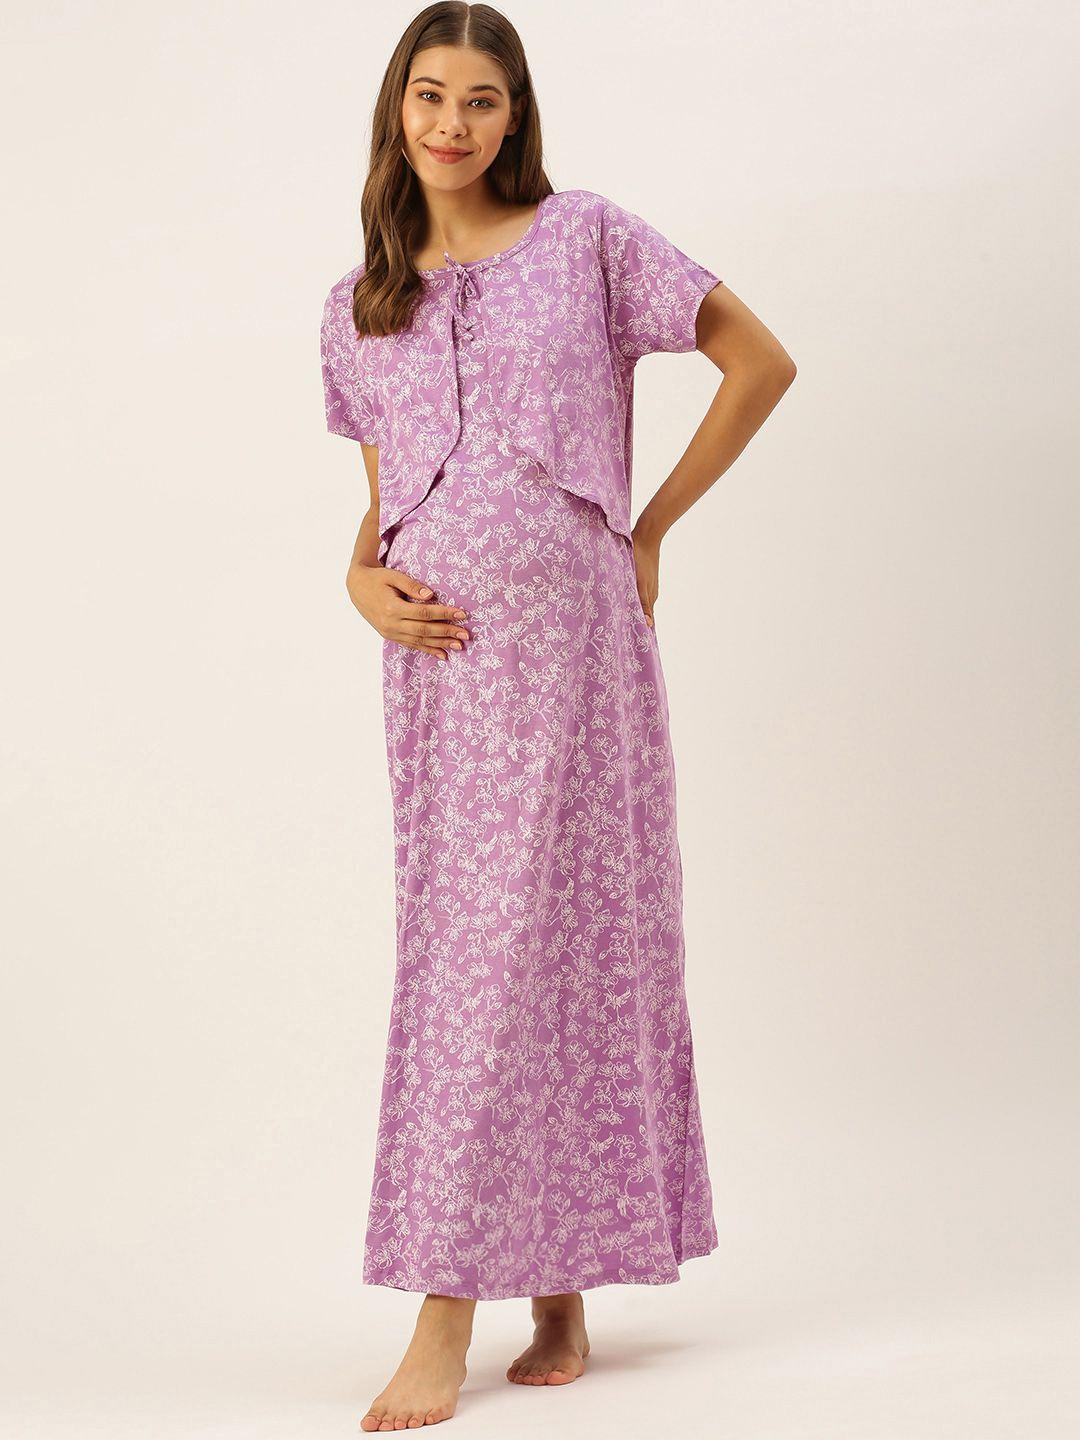 nejo-lavender-&-white-floral-printed-bow-detail-layered-cotton-maxi-maternity-nightdress